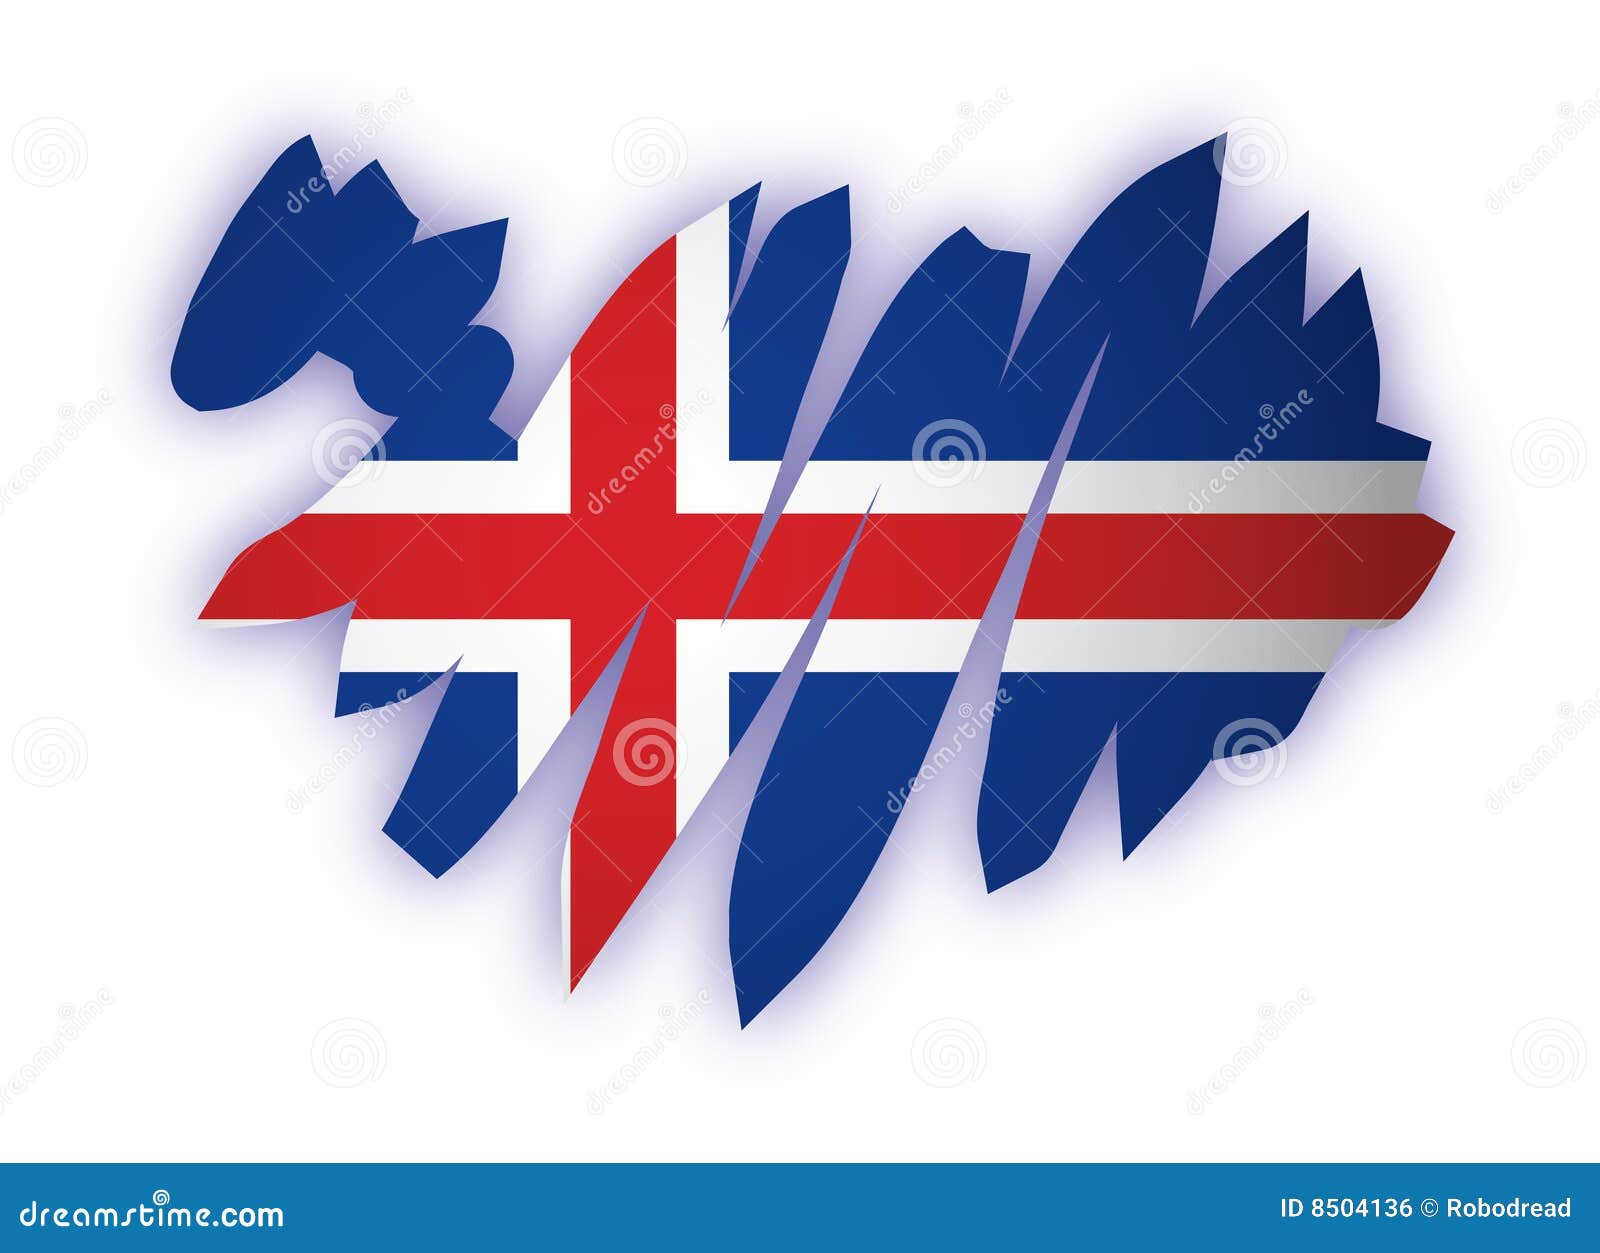 clipart iceland - photo #44